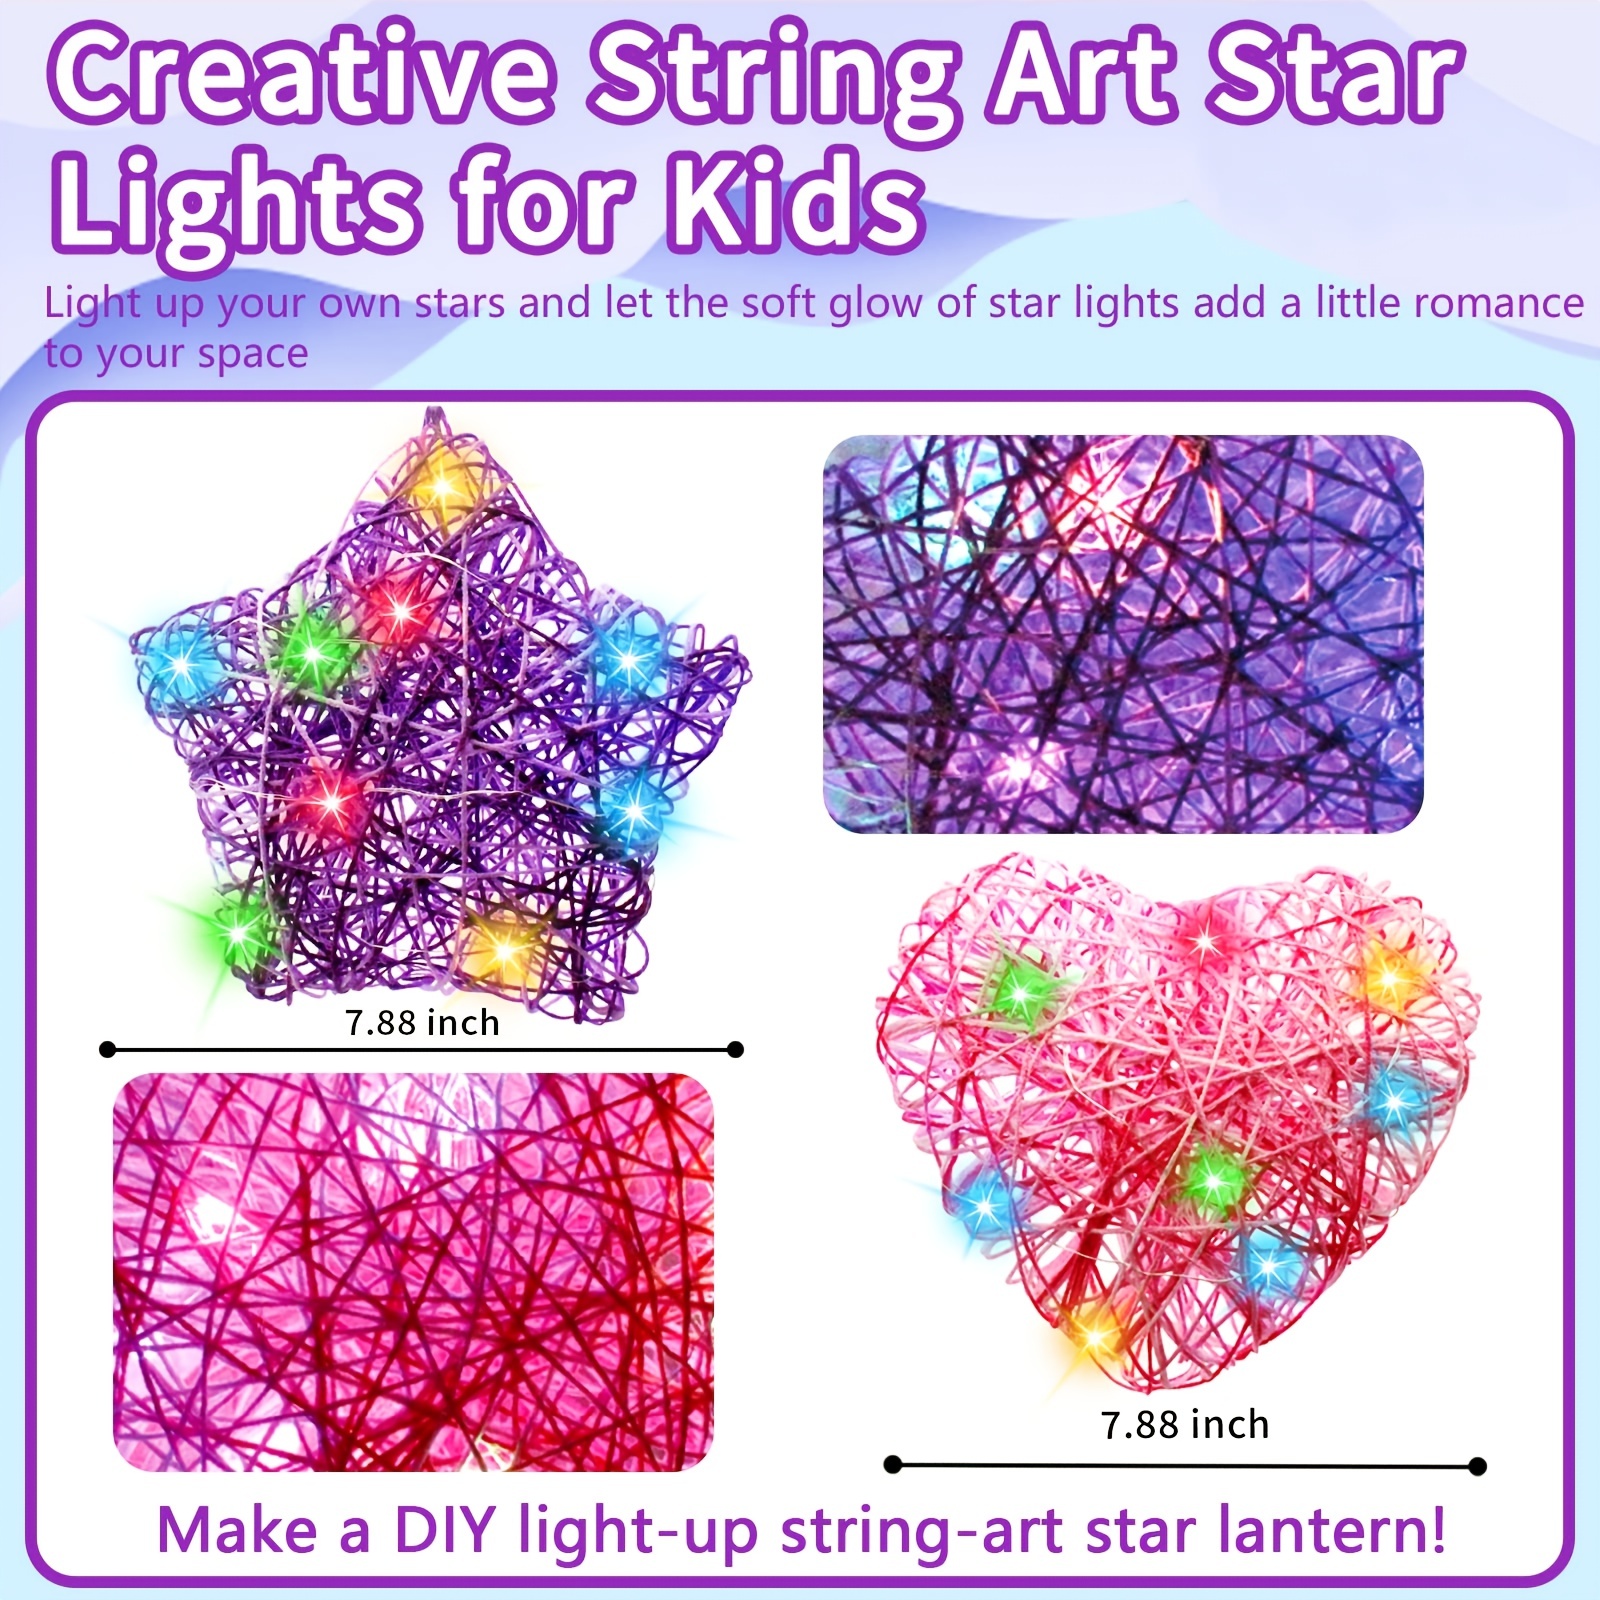 3D String Art Teen Girls Gifts 8-12 Year Old Girl Toys, Crafts for